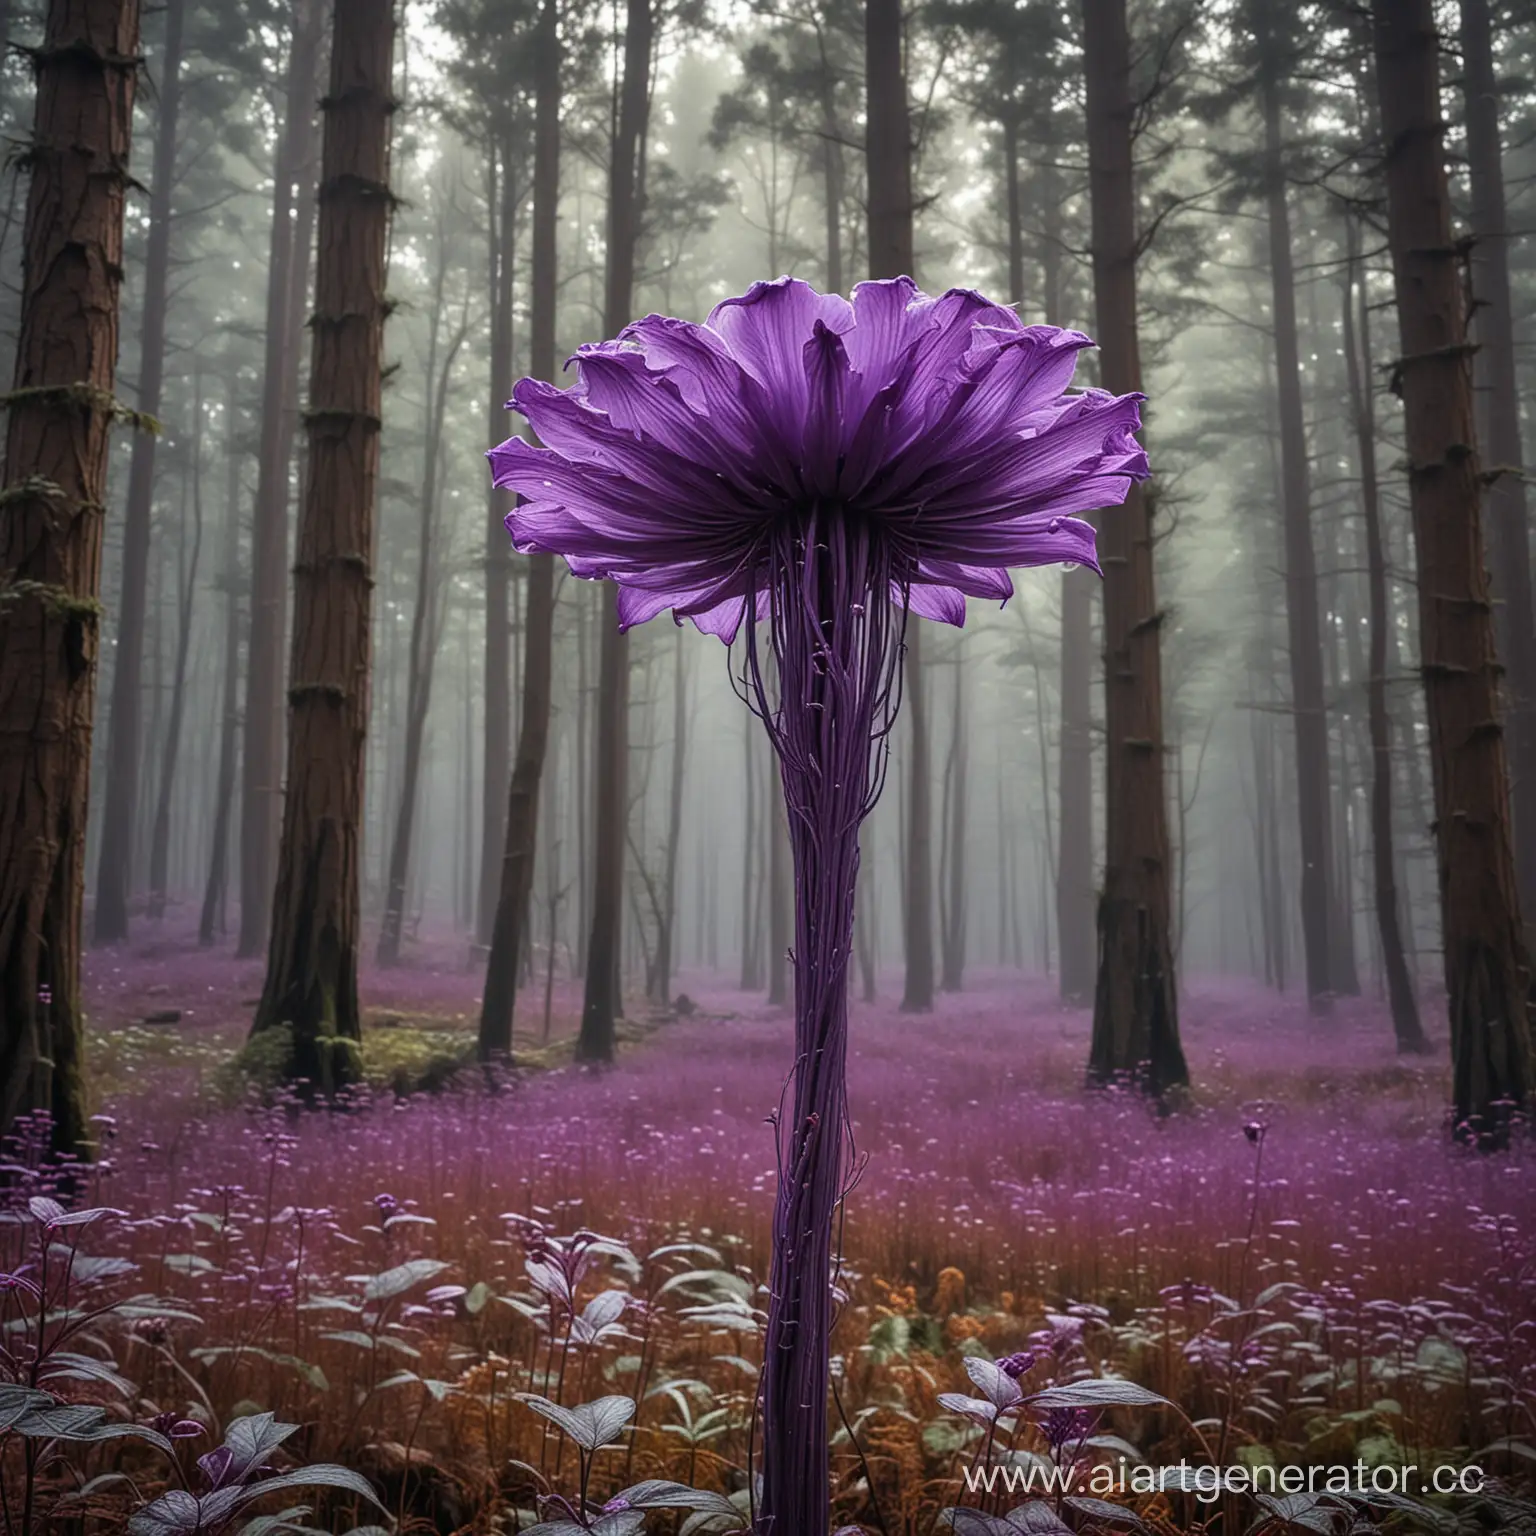 Majestic-Purple-Extraterrestrial-Flower-Amidst-Forest-Canopy